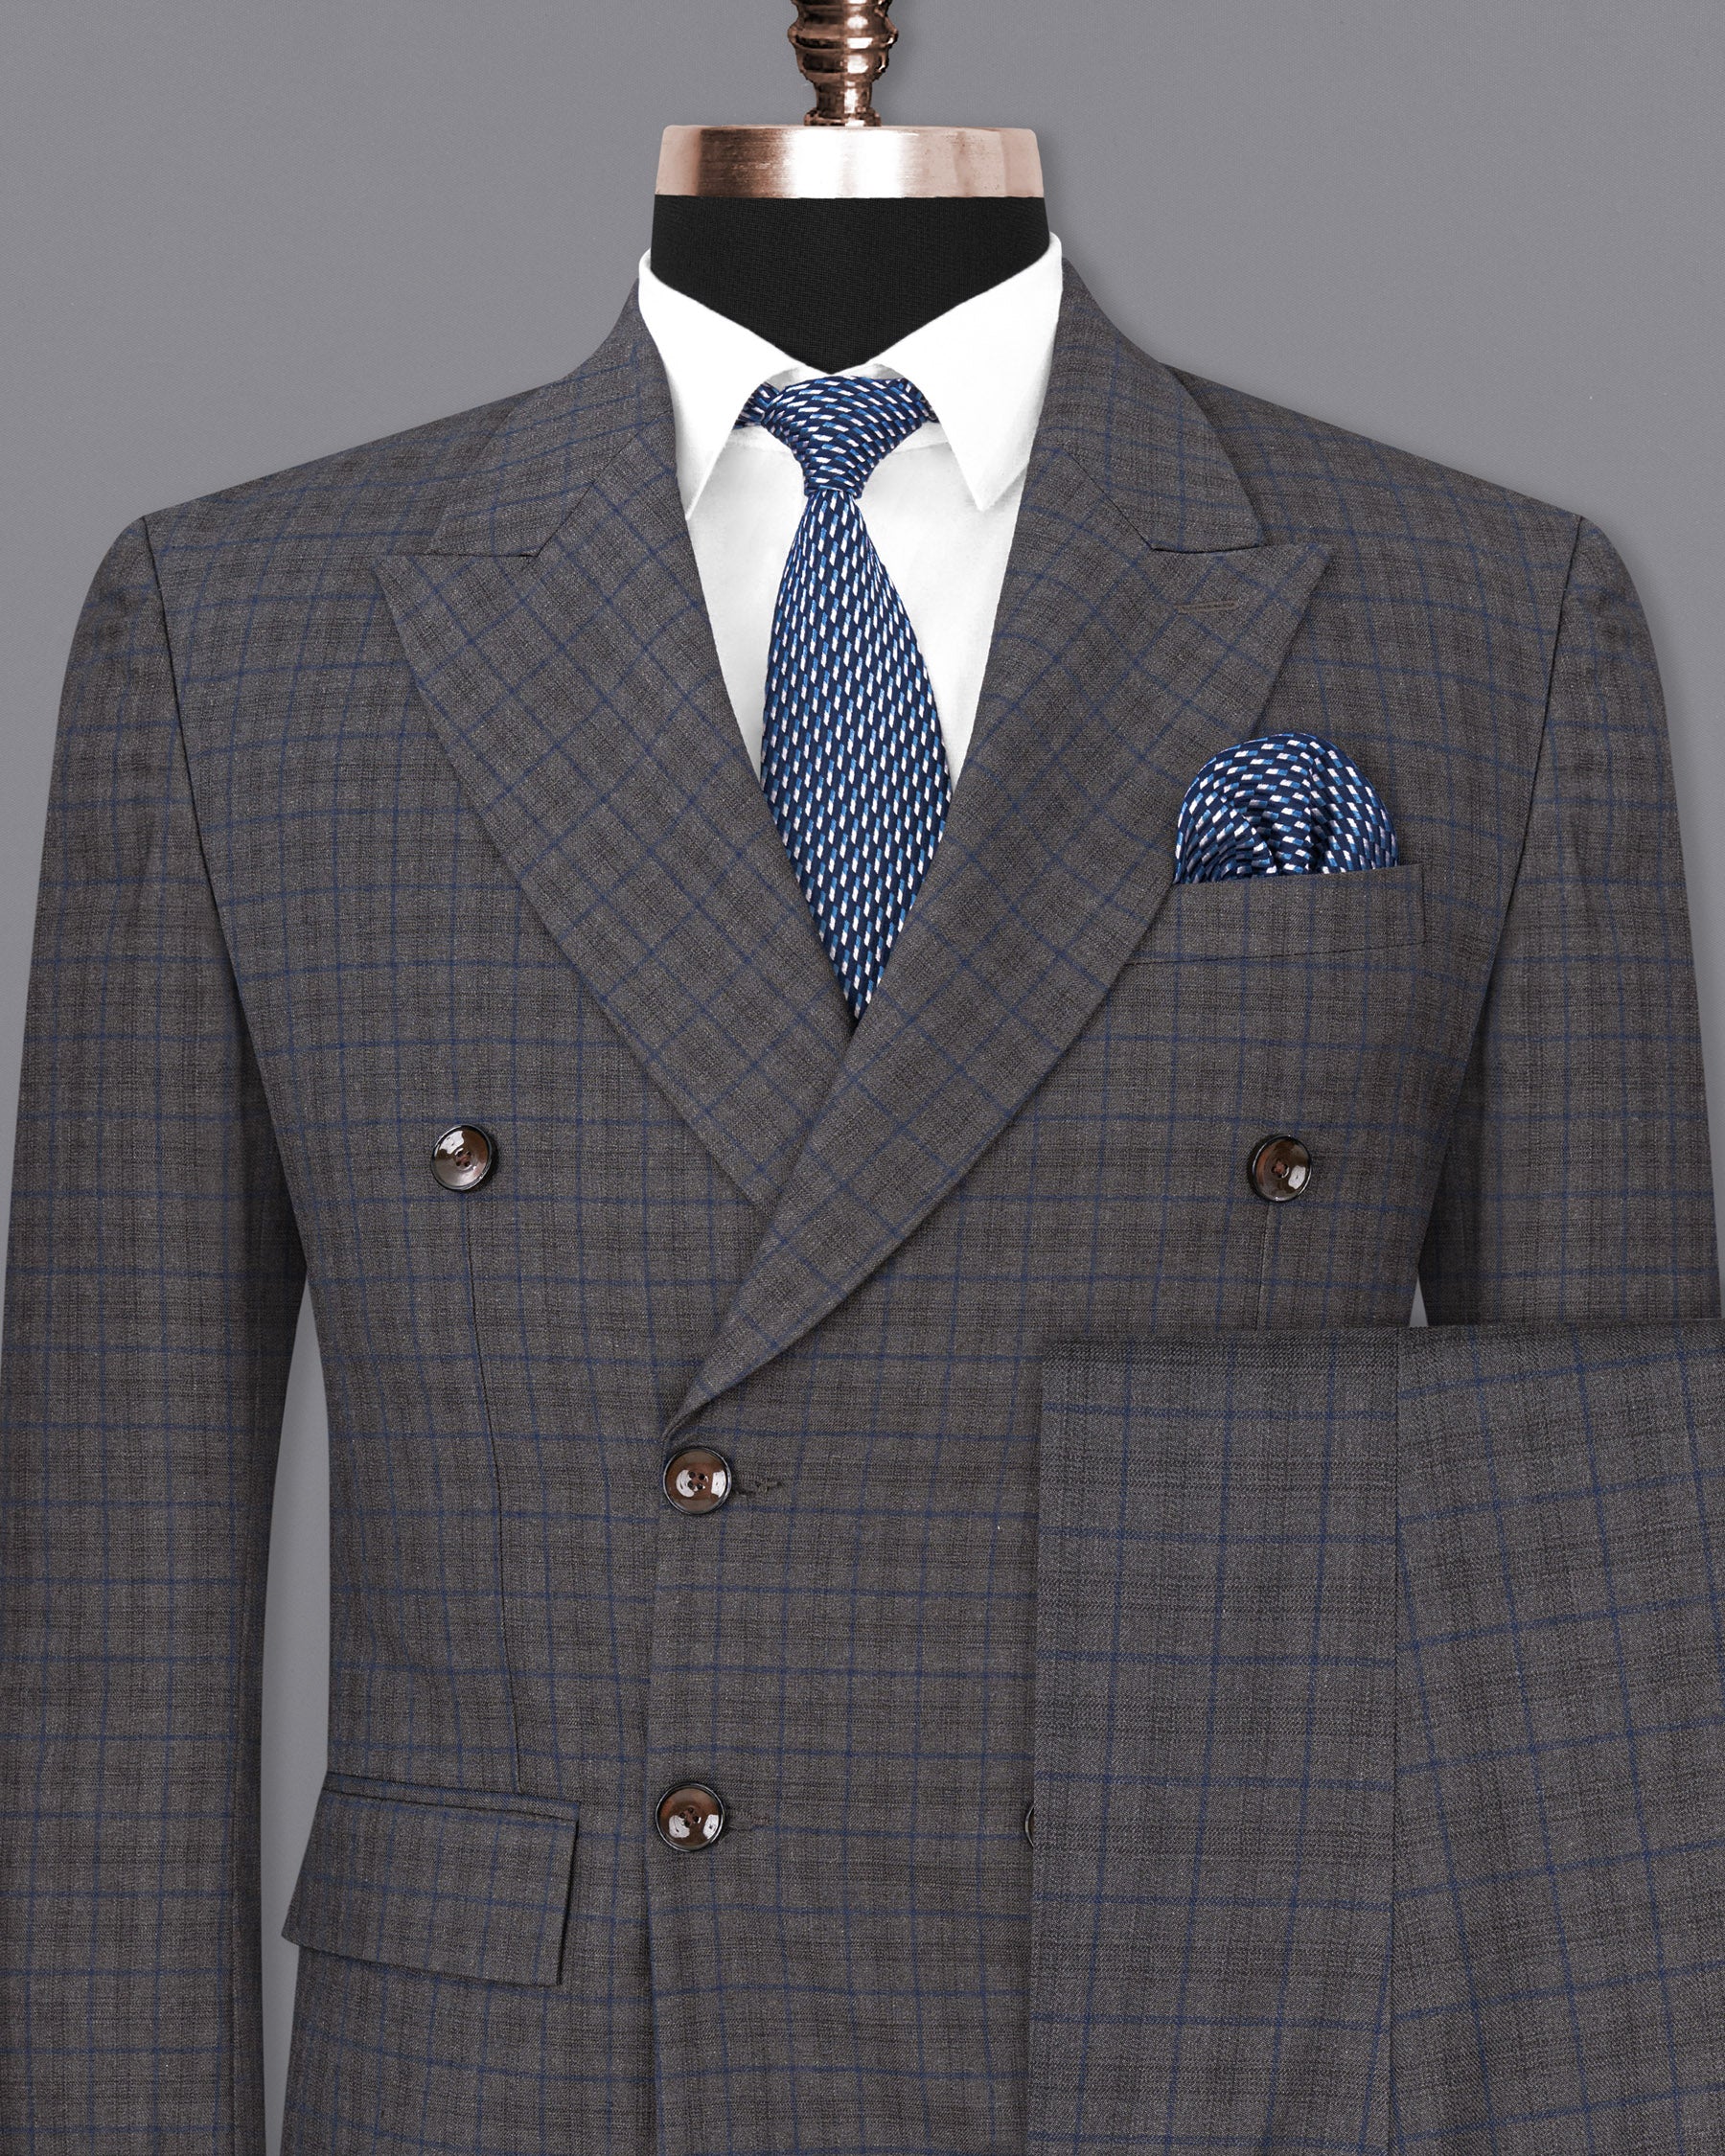 Tundora Gray Plaid Double Breasted Suit ST1724-DB-36, ST1724-DB-38, ST1724-DB-40, ST1724-DB-42, ST1724-DB-44, ST1724-DB-46, ST1724-DB-48, ST1724-DB-50, ST1724-DB-52, ST1724-DB-54, ST1724-DB-56, ST1724-DB-58, ST1724-DB-60